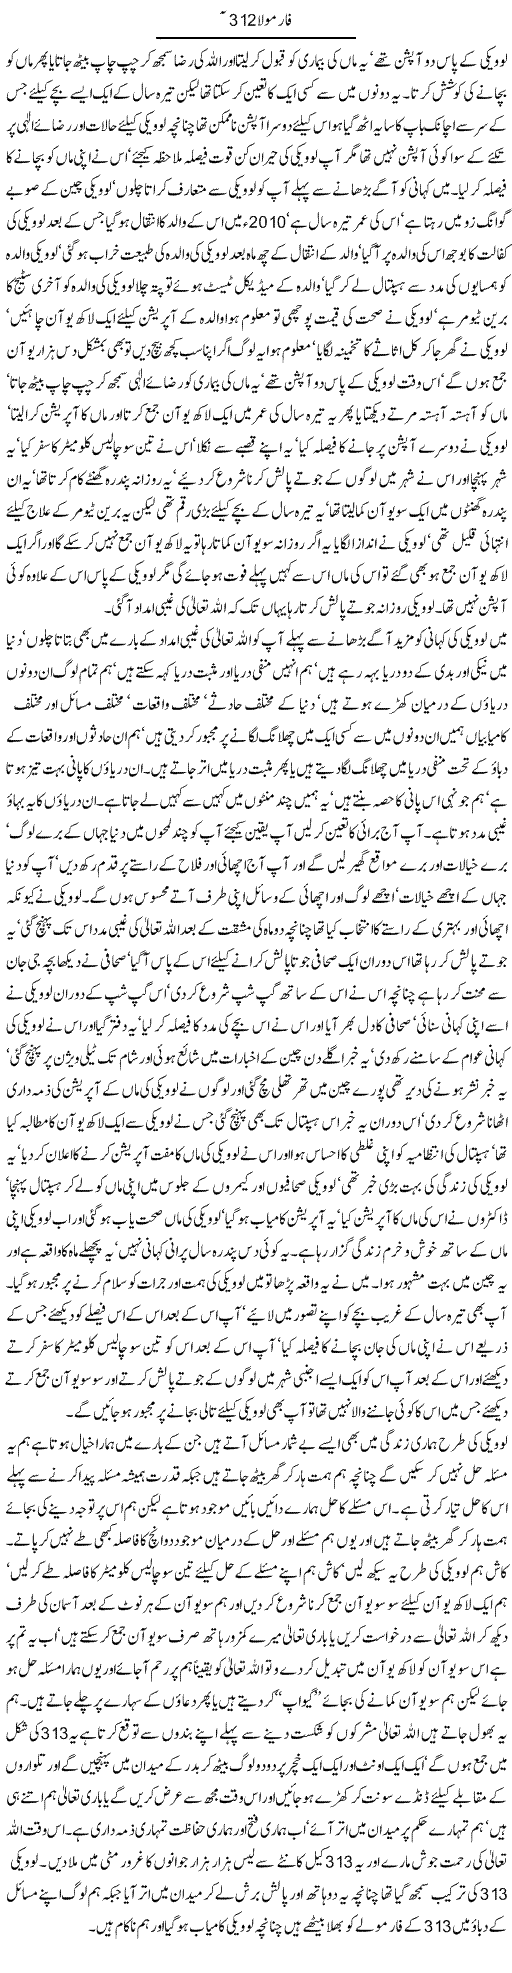 Lowkey's Mother Express Column Javed Chaudhry 19 June 2011